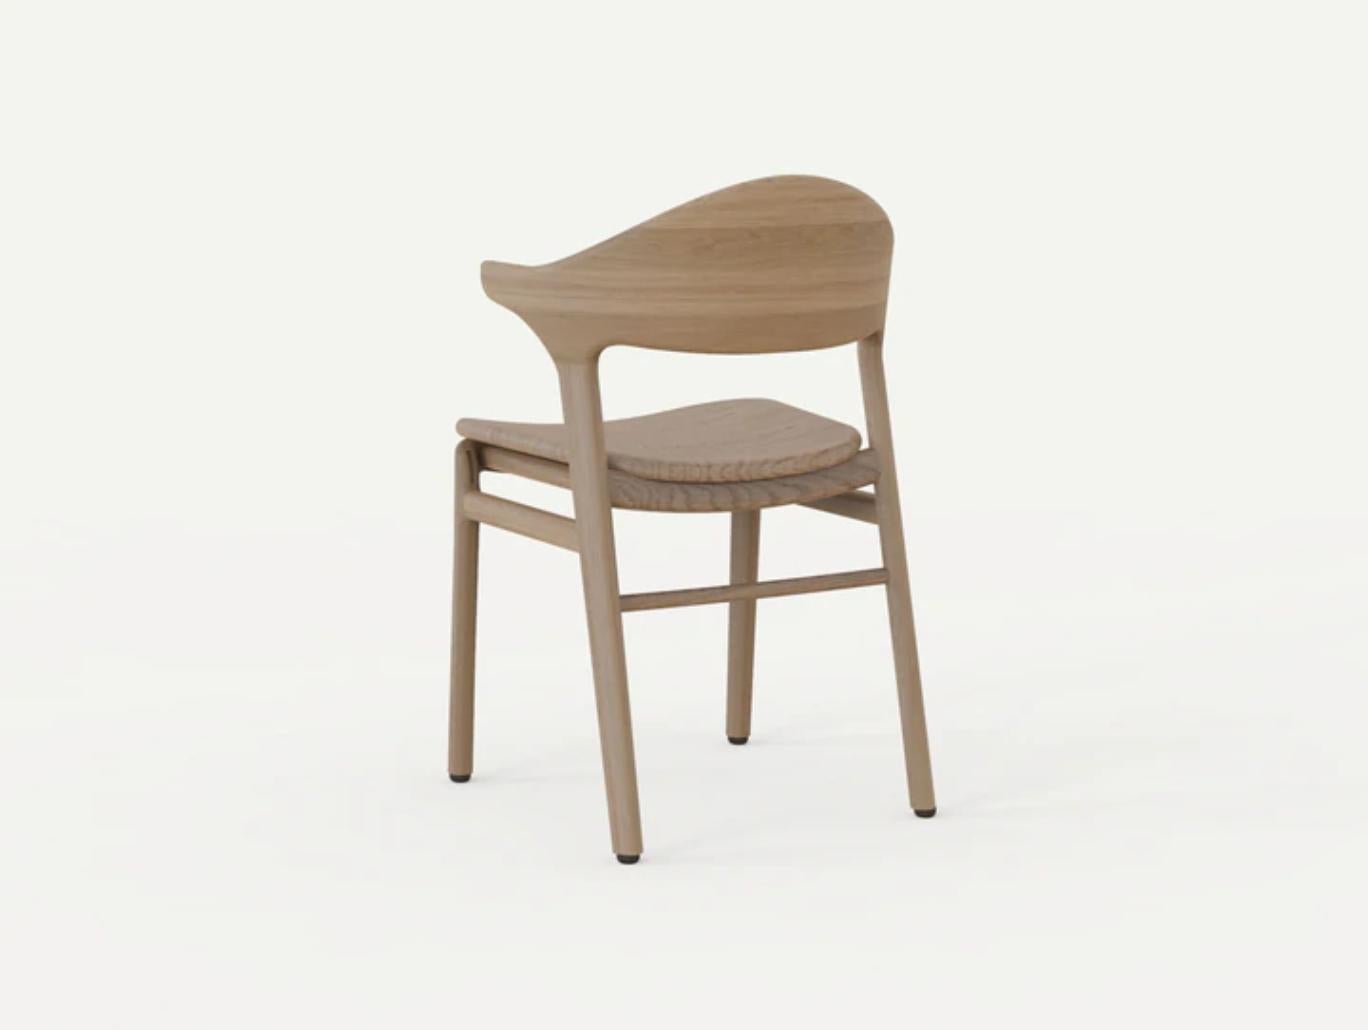 Other Set of 2 Boreal Chairs by Sebastián Angeles